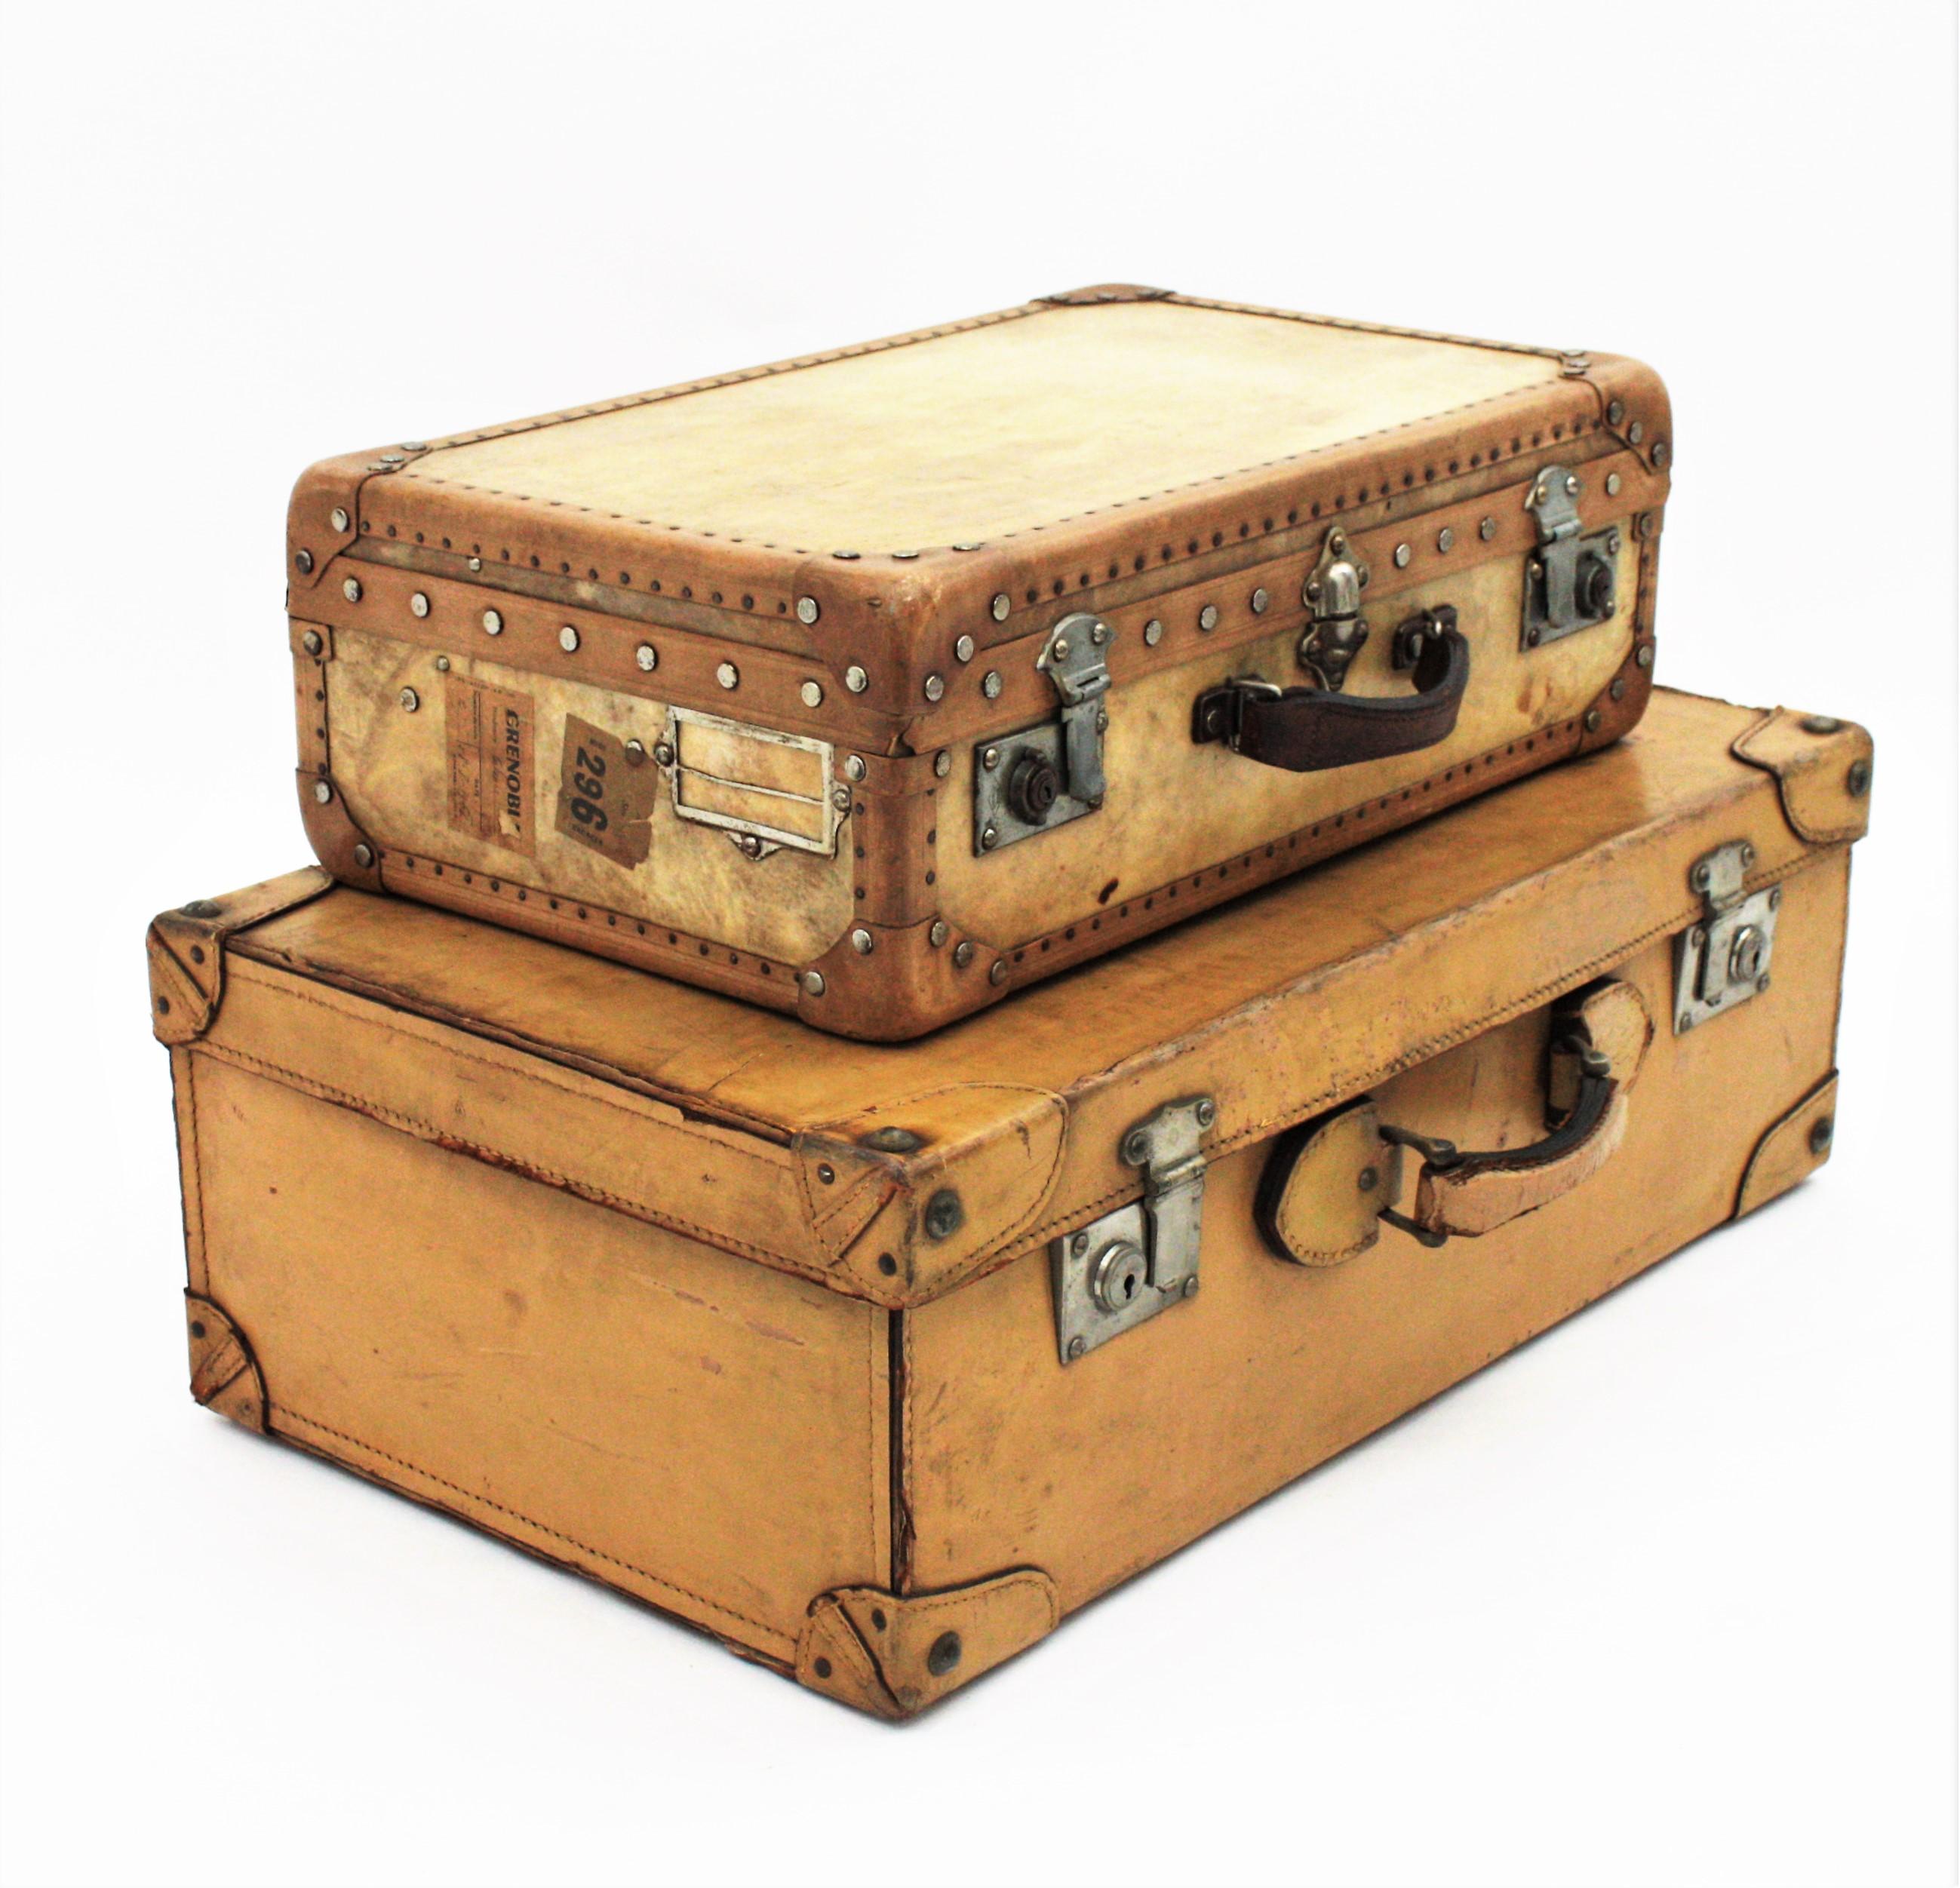 Beautiful set of two suitcases made of cream leather and parchement, France, 1930s-1940s.
Metal locks and studs and leather handles.
The small one is made in vellum.
The large one is made in beige / cream leather.
Use them for decorative or